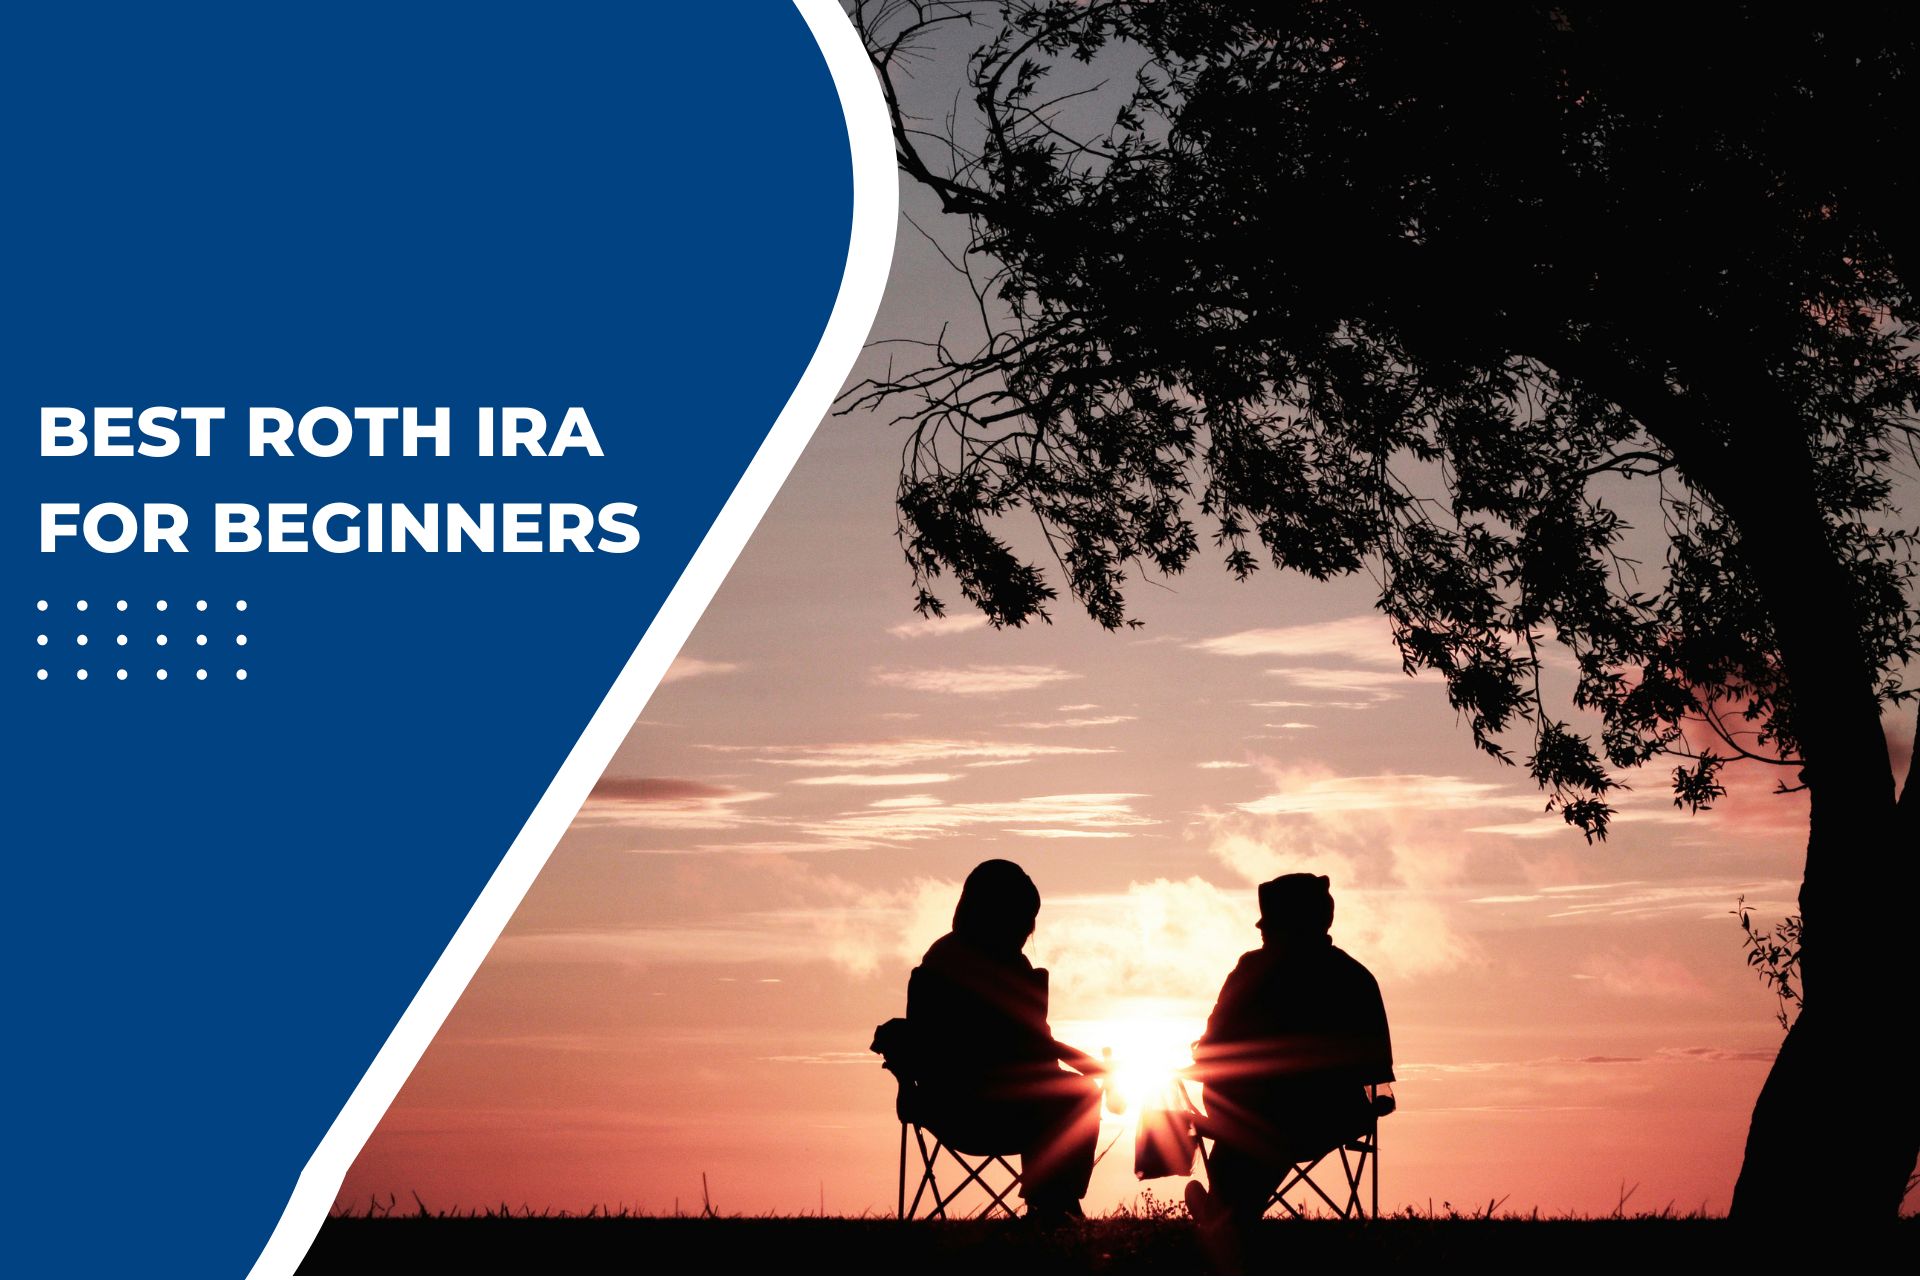 Best Roth IRA for Beginners